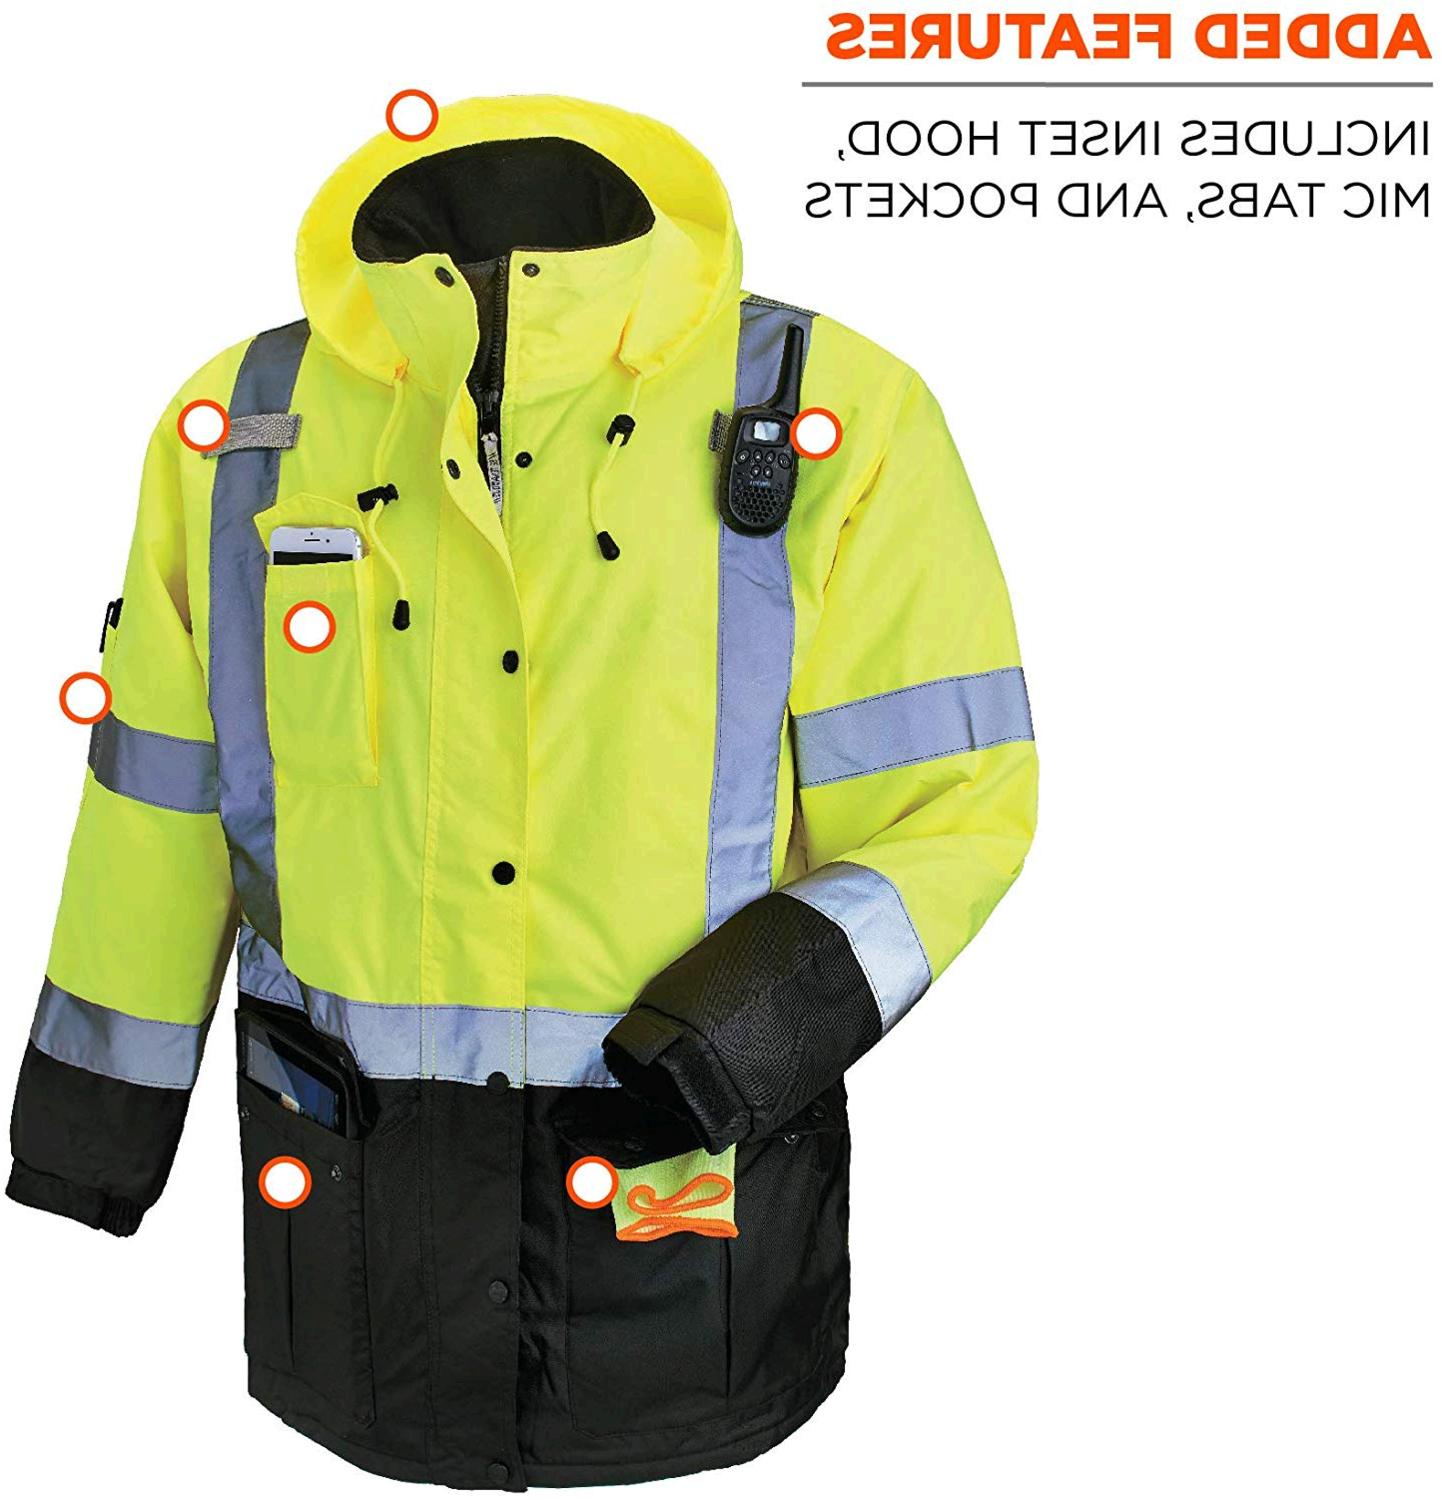 High Visibility Reflective Winter Safety Jacket, Insulated, Lime, Size Large eBay